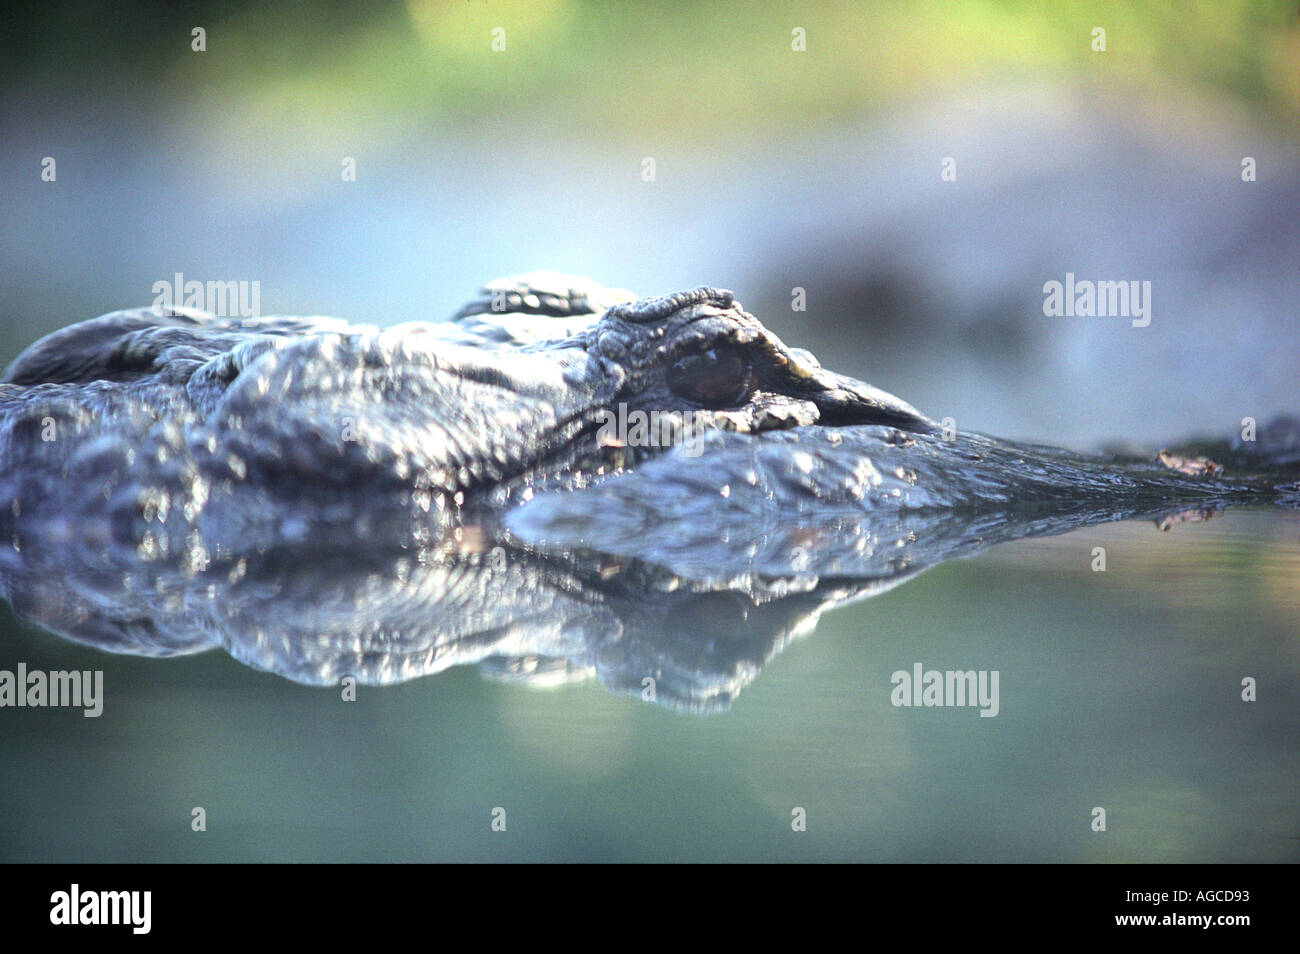 Eyes of an alligator just above the surface of the water Stock Photo